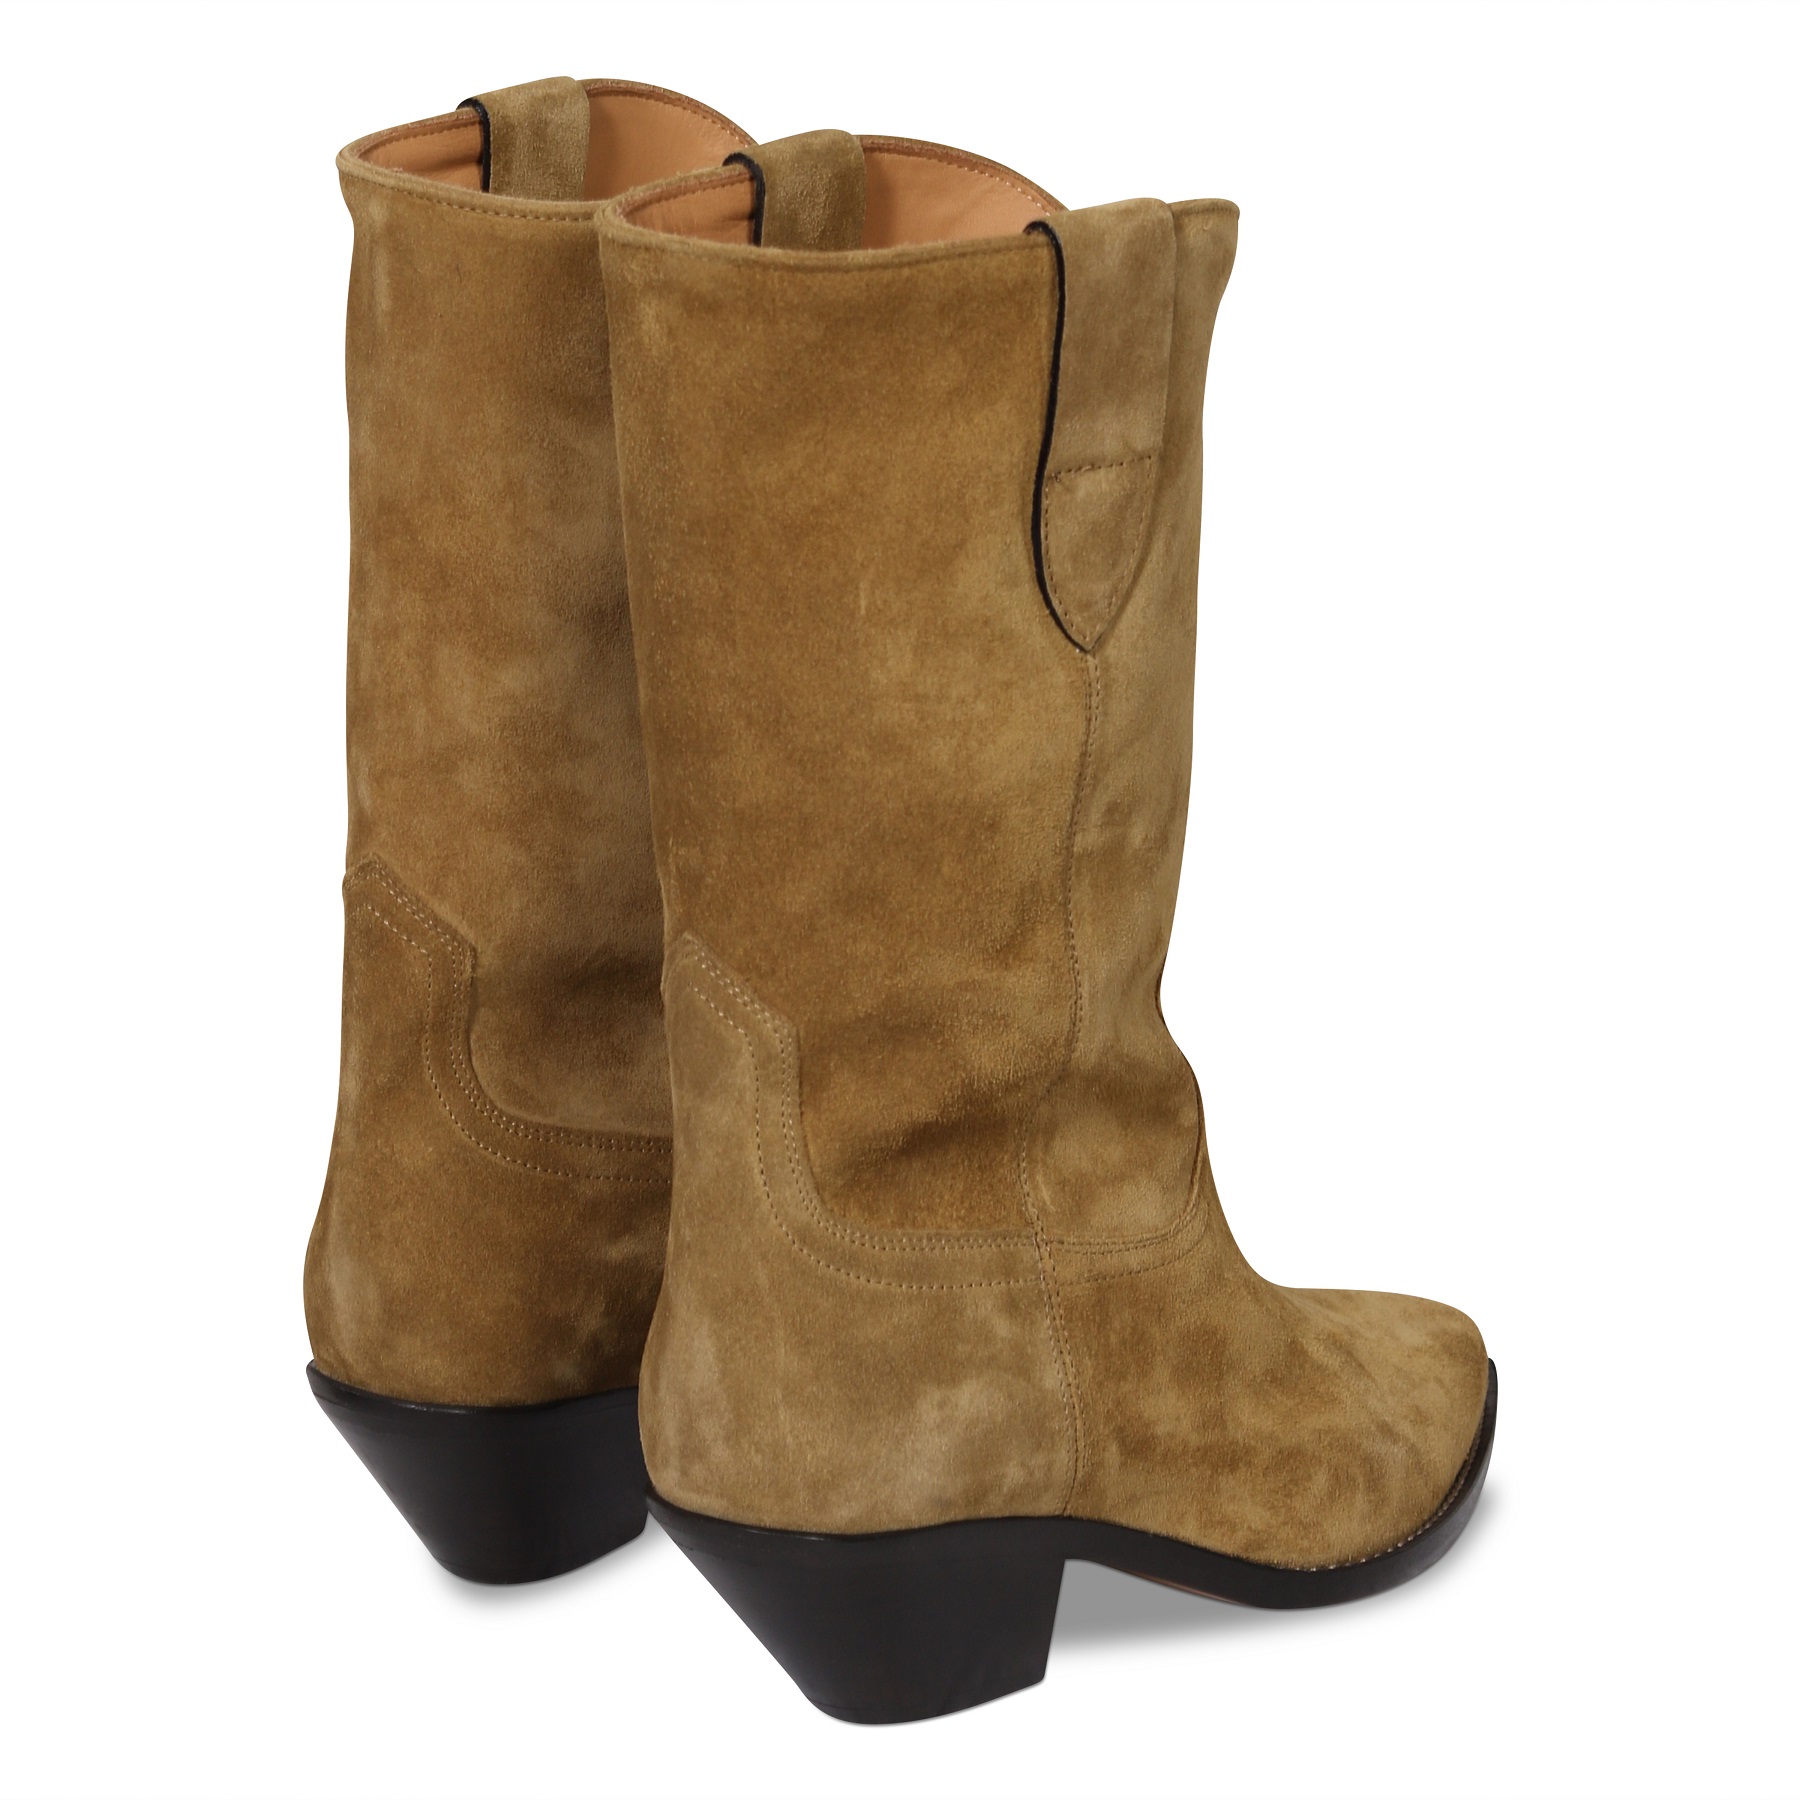 ISABEL MARANT Dahope Boots in Taupe 38